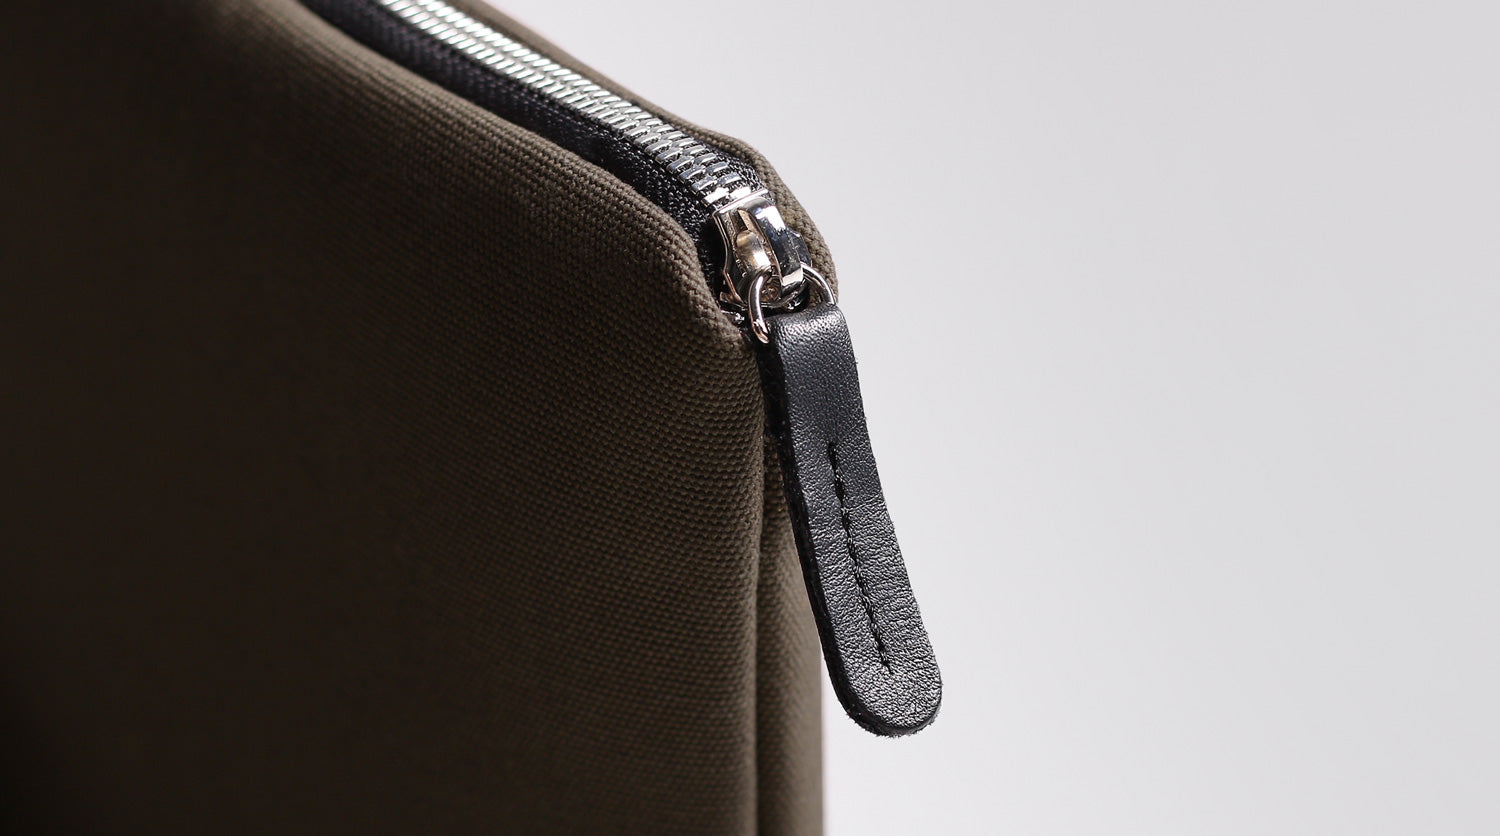 Zipper and leather detail of the MacBook Pro sleeve.